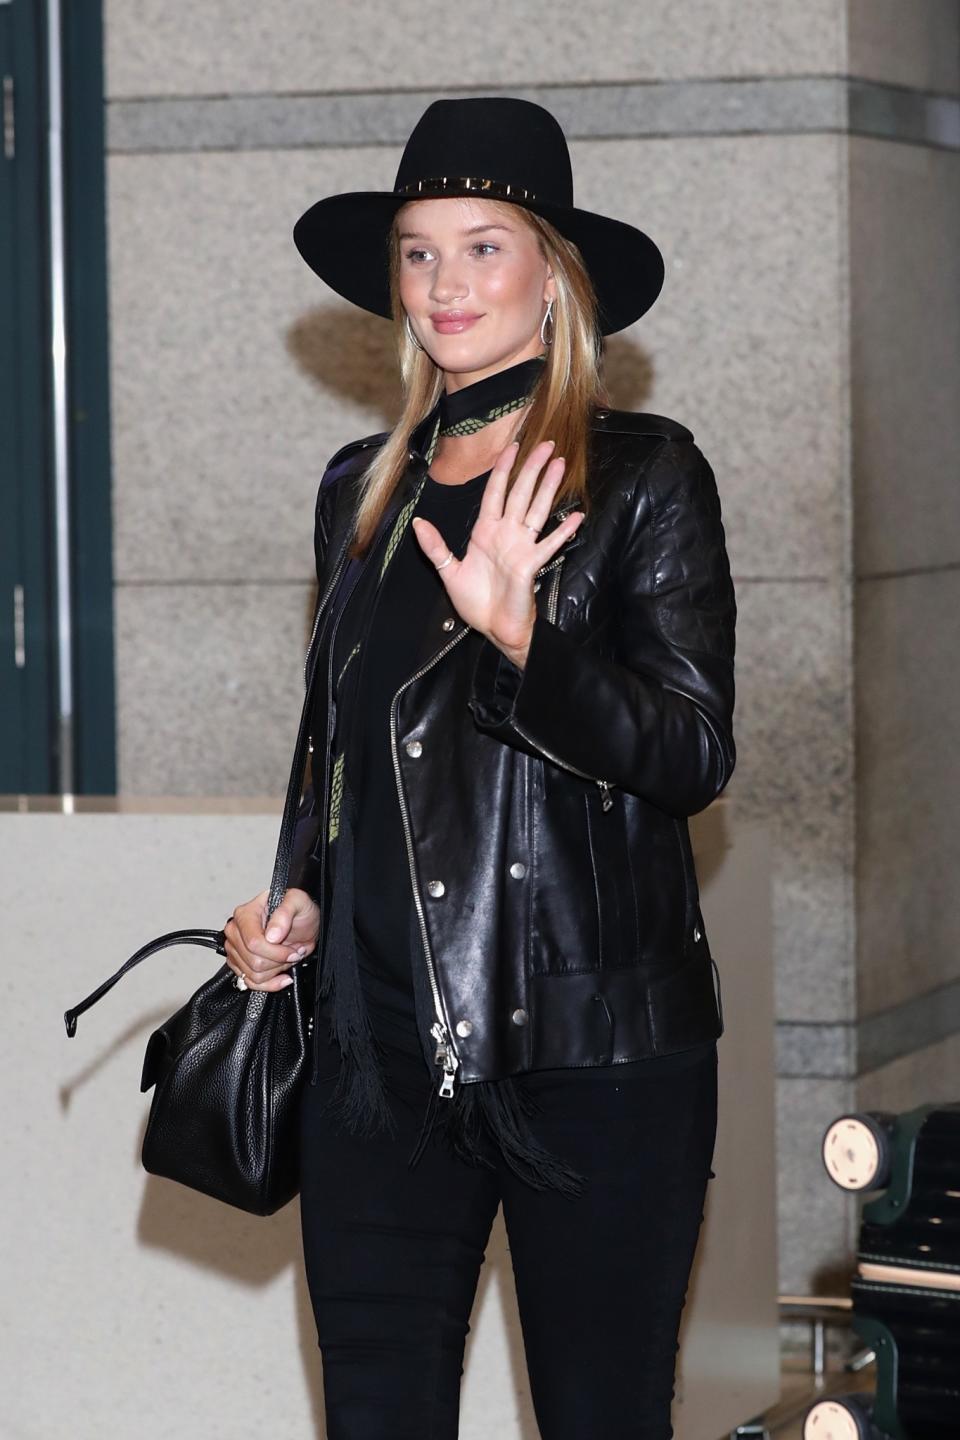 Rosie Huntington-Whiteley styles her chic Rockins scarf with a black fedora and slick leather jacket in South Korea.